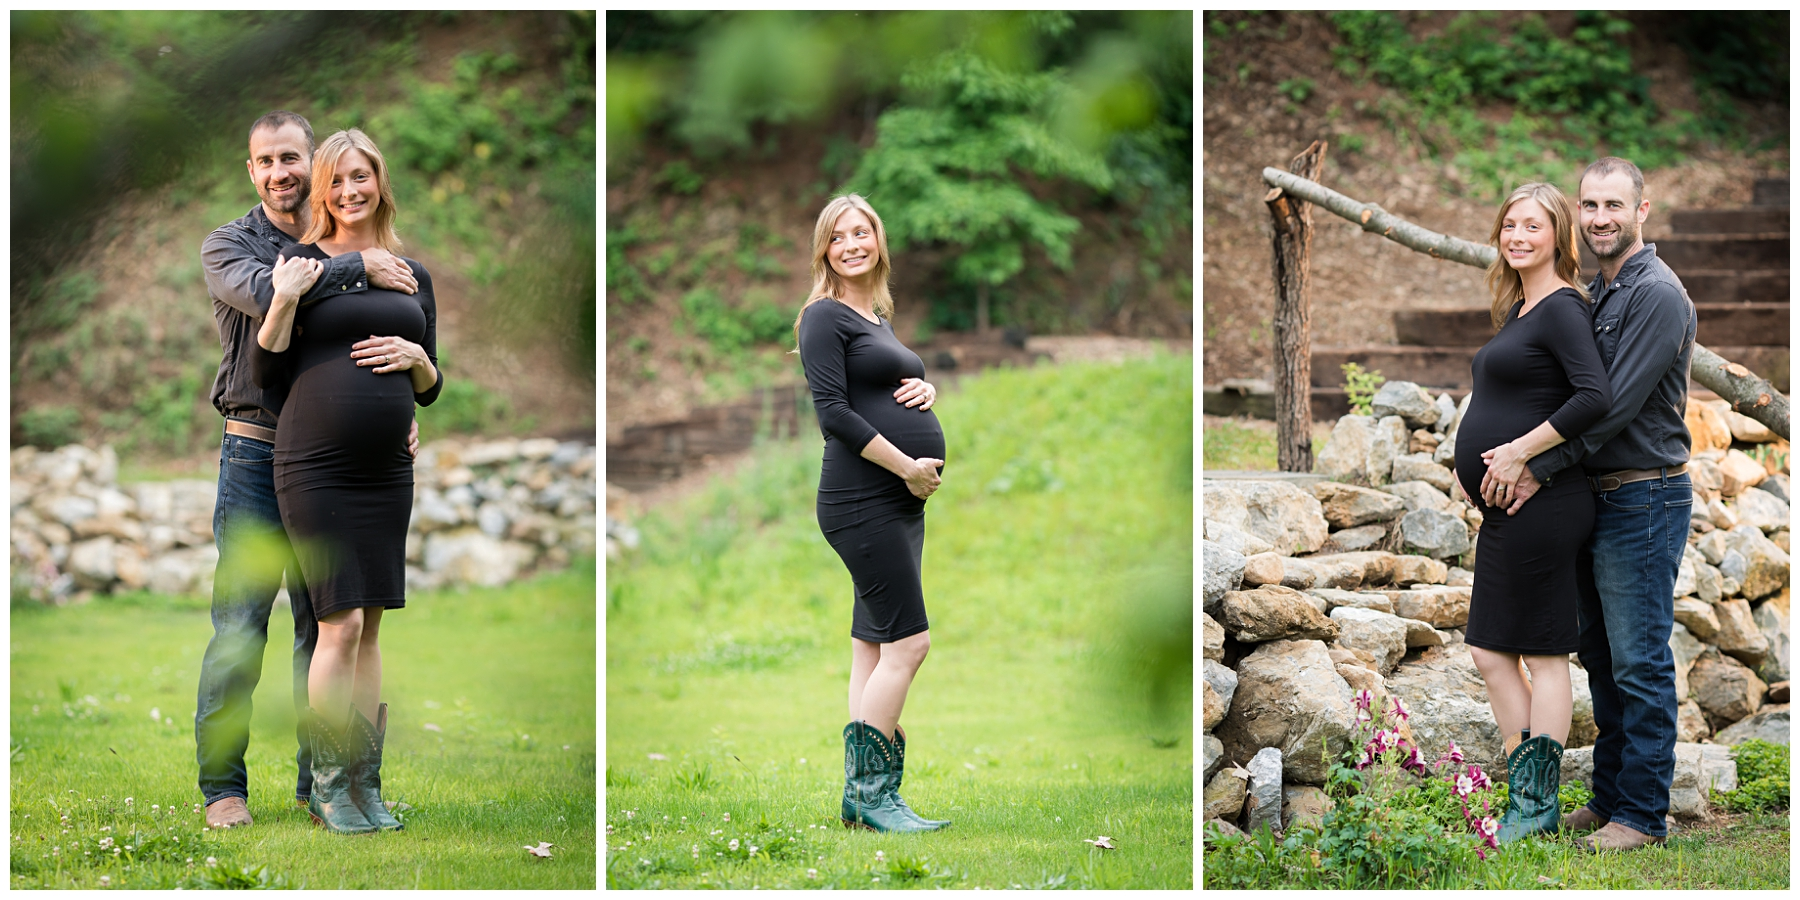 Outdoor Maternity Session Berks County PA_0130.jpg